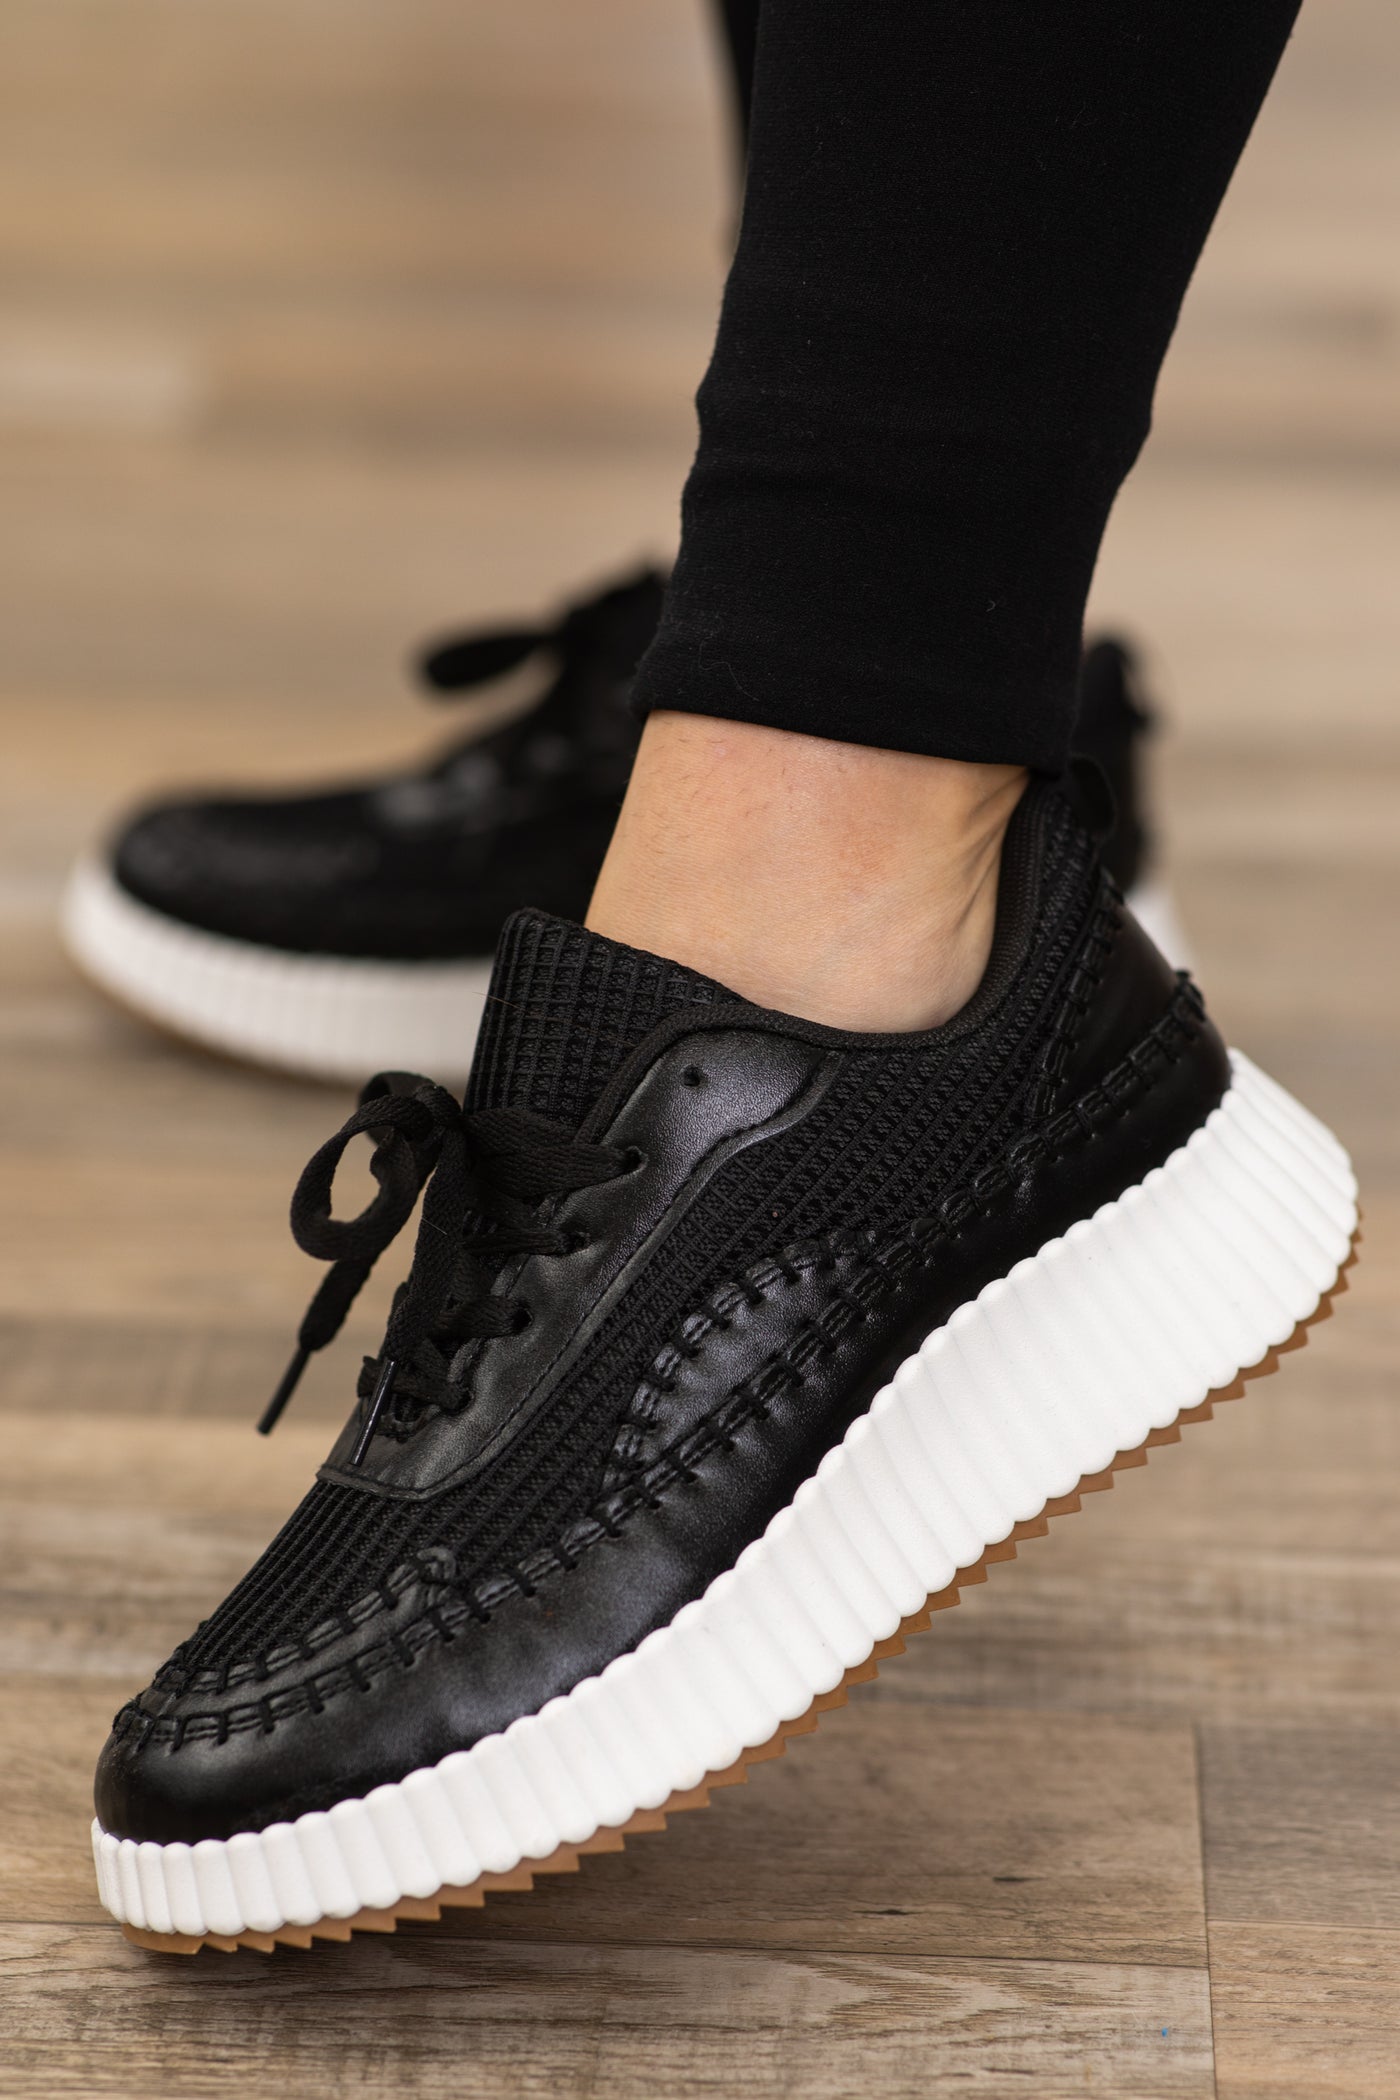 Black and White Platform Sneakers